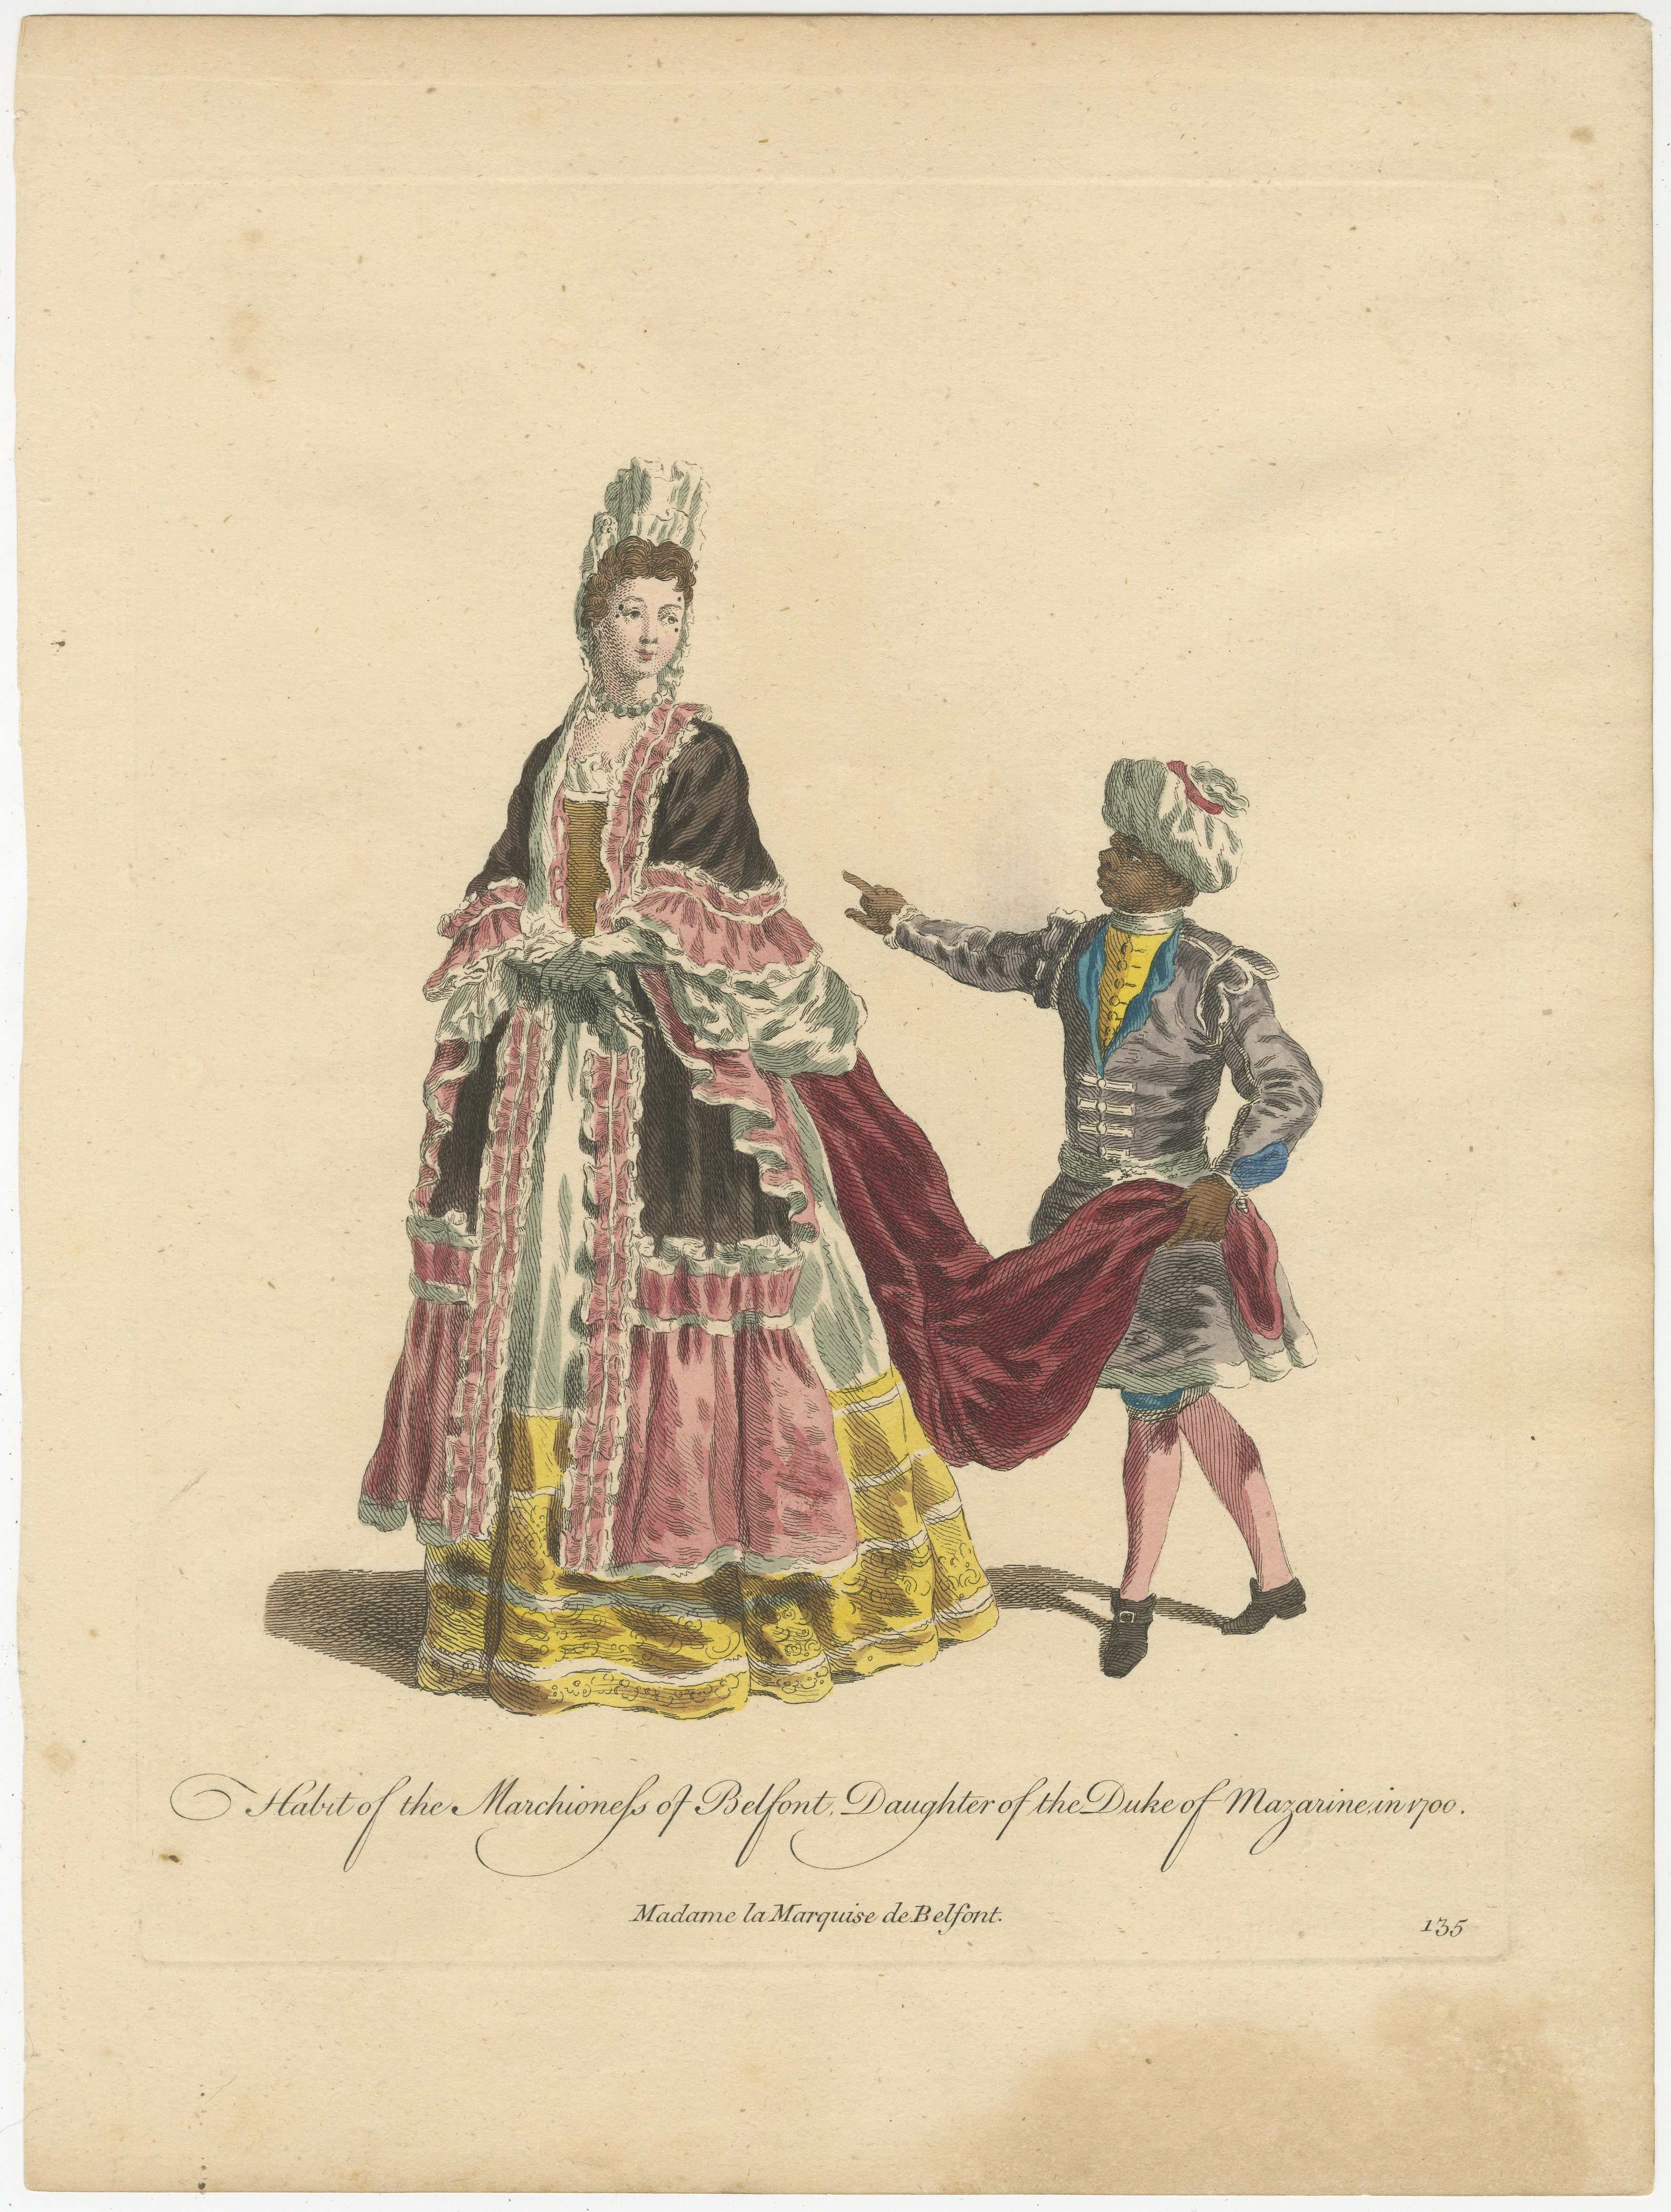 This original engraving depicts a woman and a young black boy from the 18th century, and was published between the years 1757 and 1772, likely in 1757. 

The woman is identified as the Marchioness of Belfont, daughter of the Duke of Mazarine, in the